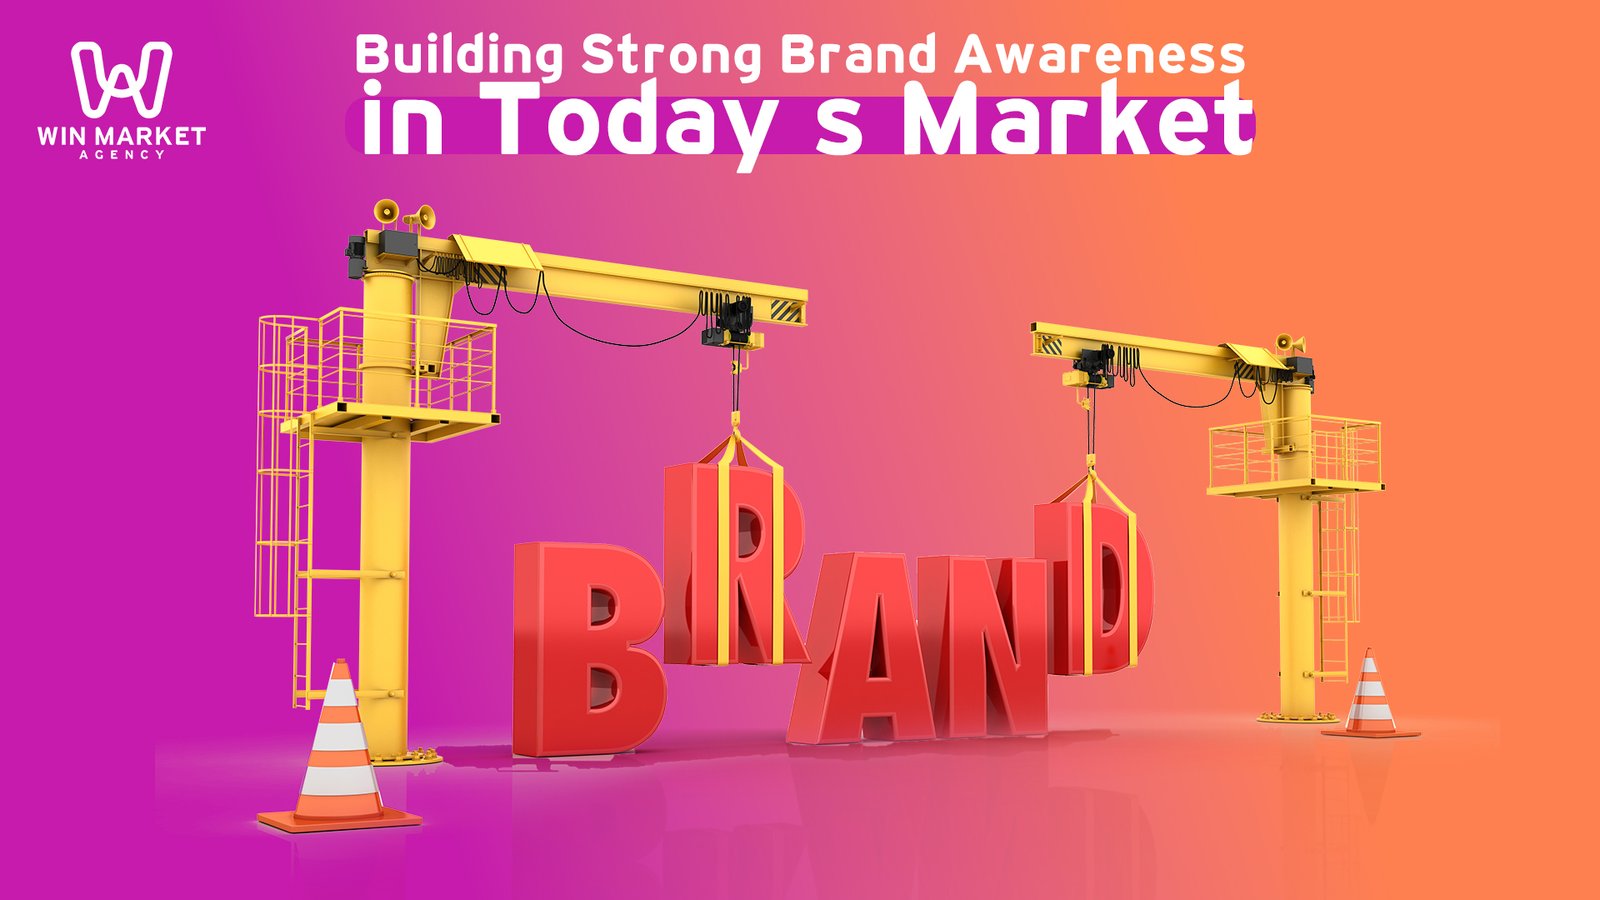 Building Strong Brand Awareness in Today’s Market